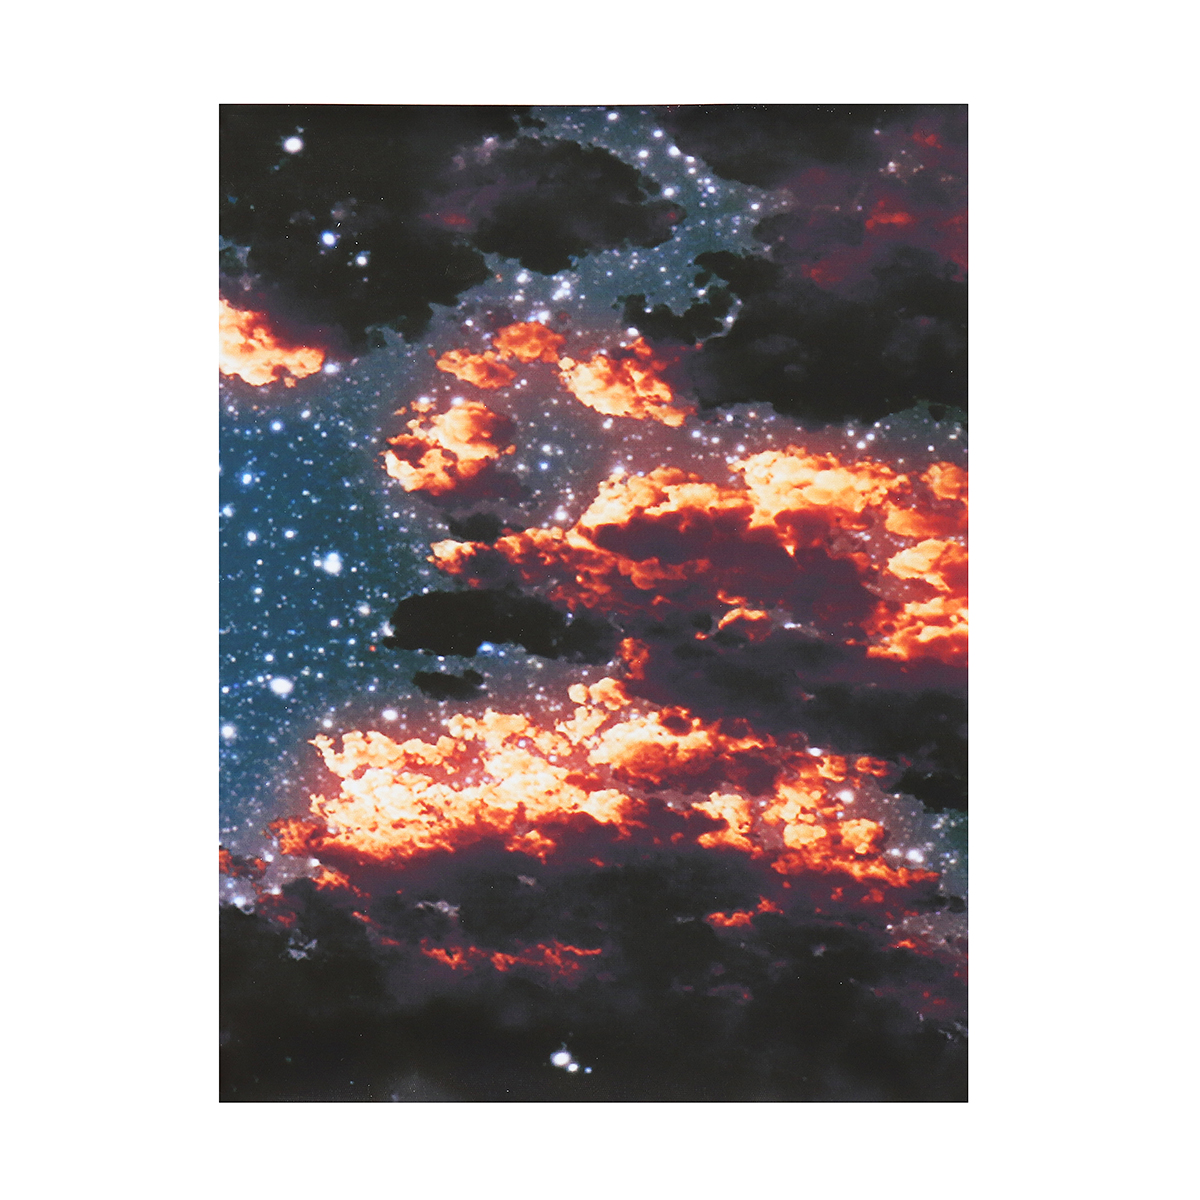 5Pcs-Canvas-Painting-Starry-Sky-Wall-Decorative-Print-Art-Pictures-Frameless-Wall-Hanging-Home-Offic-1803048-5